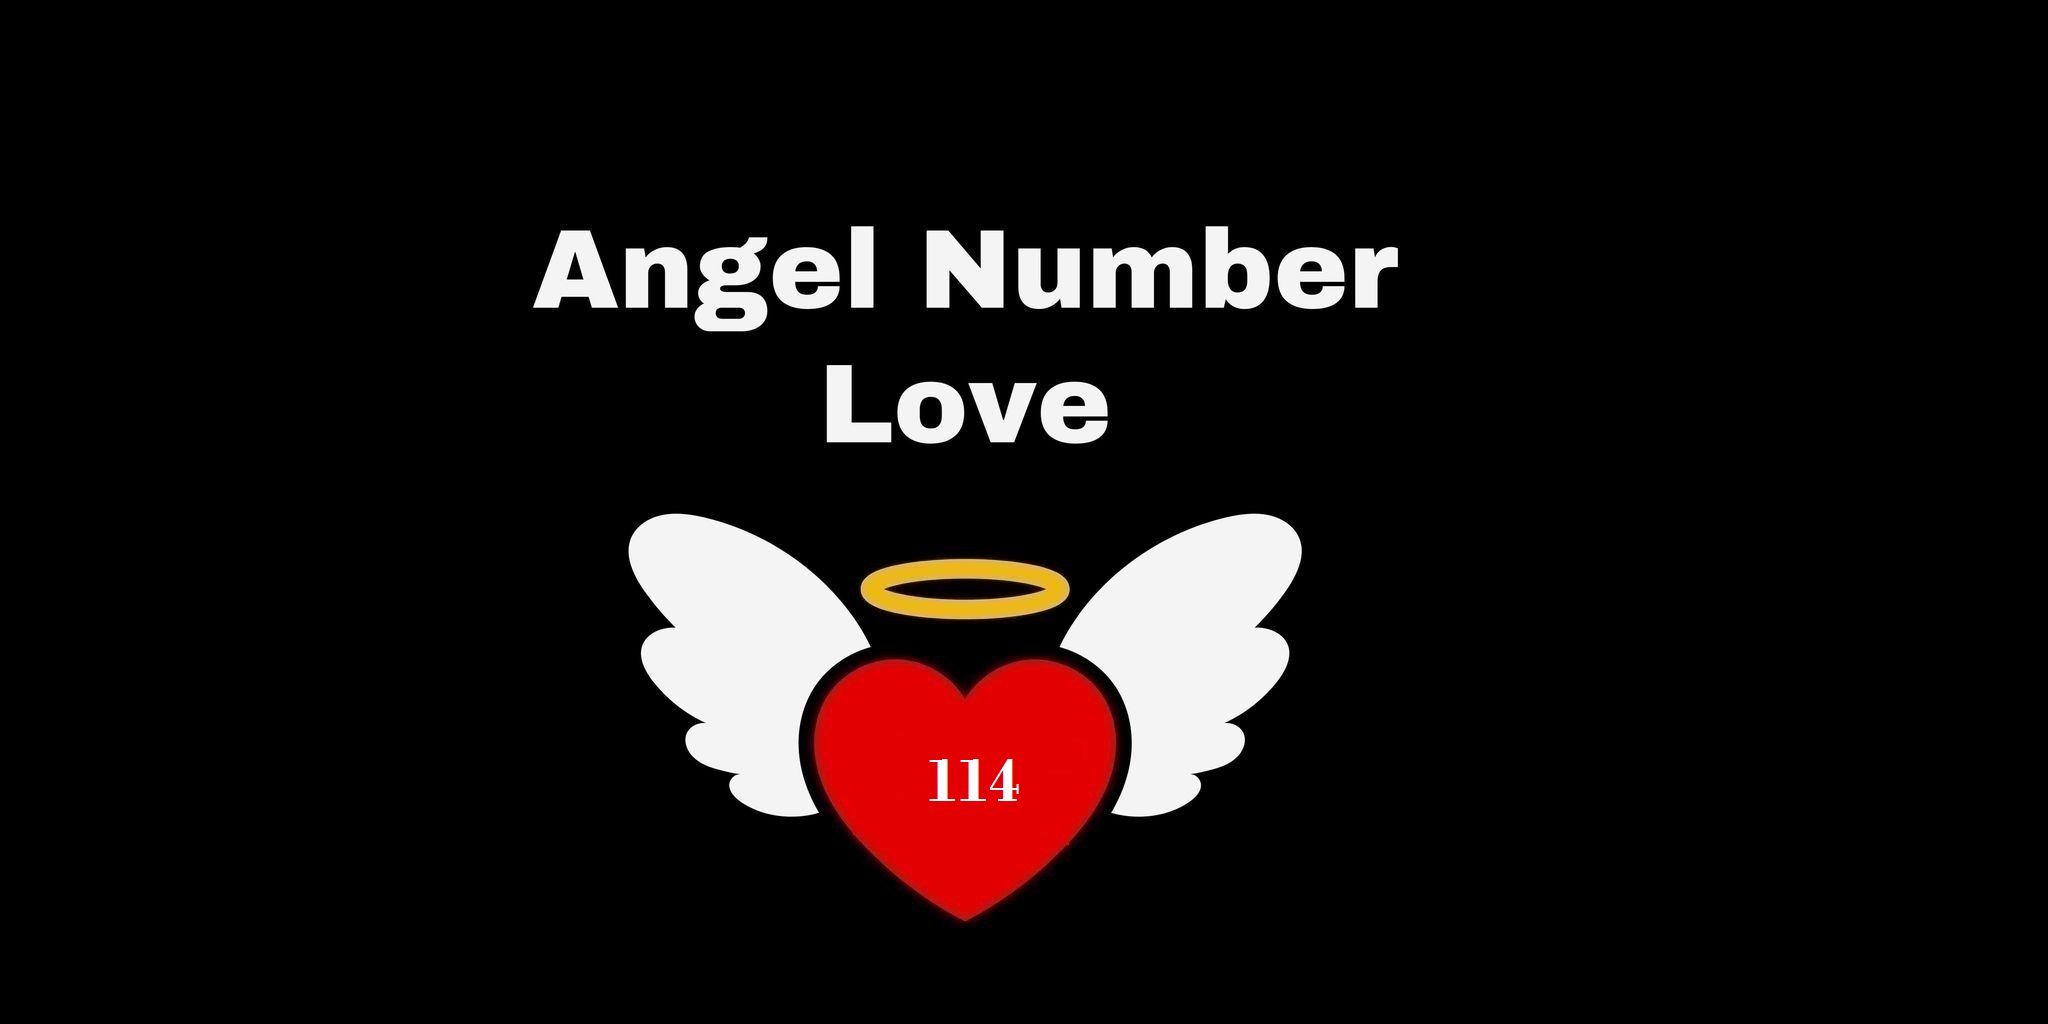 114 Angel Number Meaning In Love